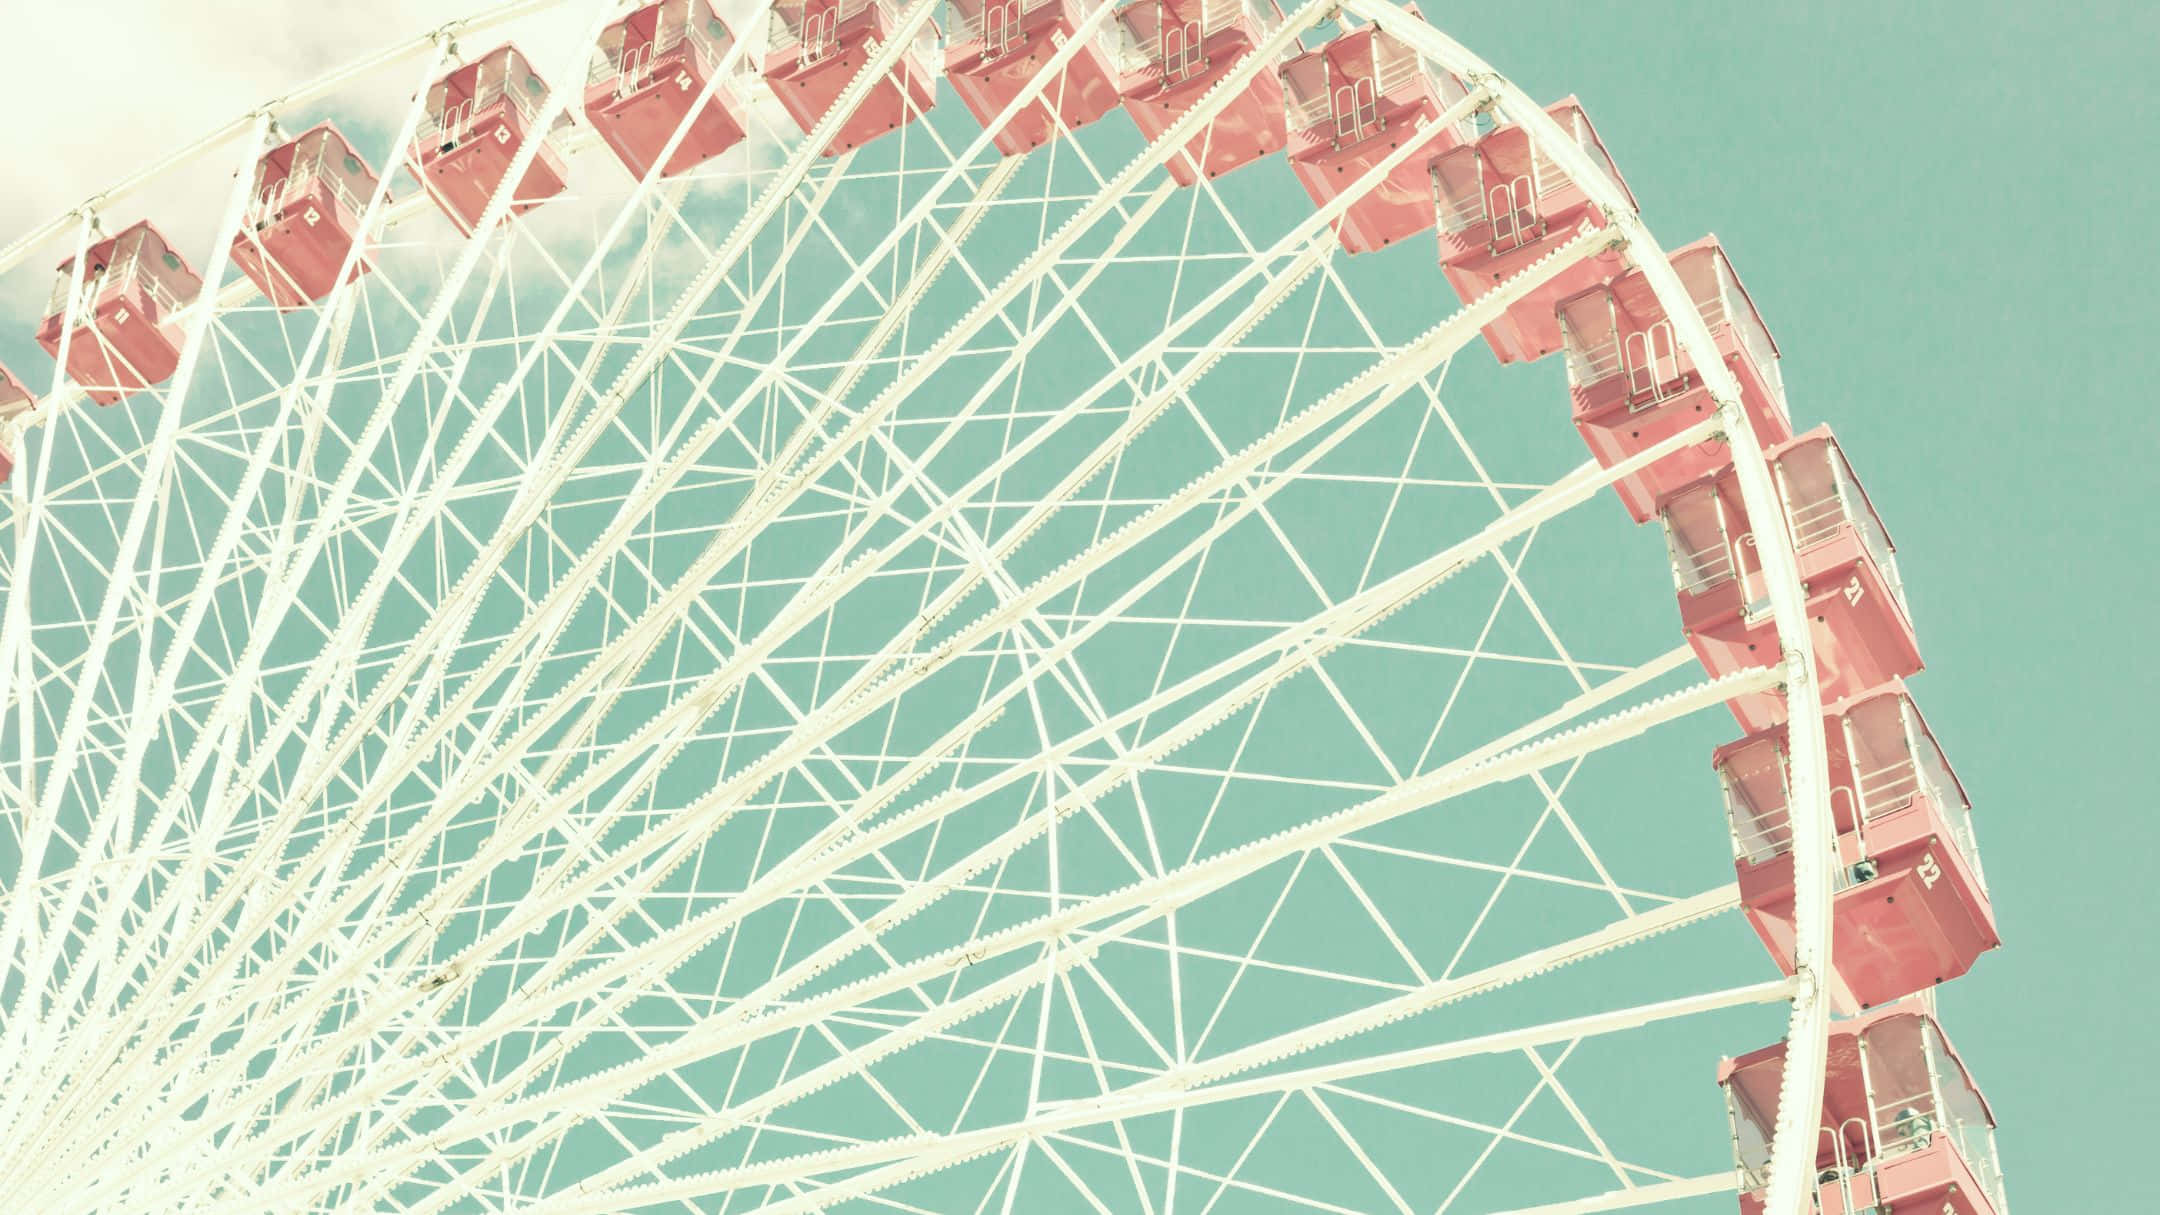 A Ferris Wheel With A Pink And White Color Scheme